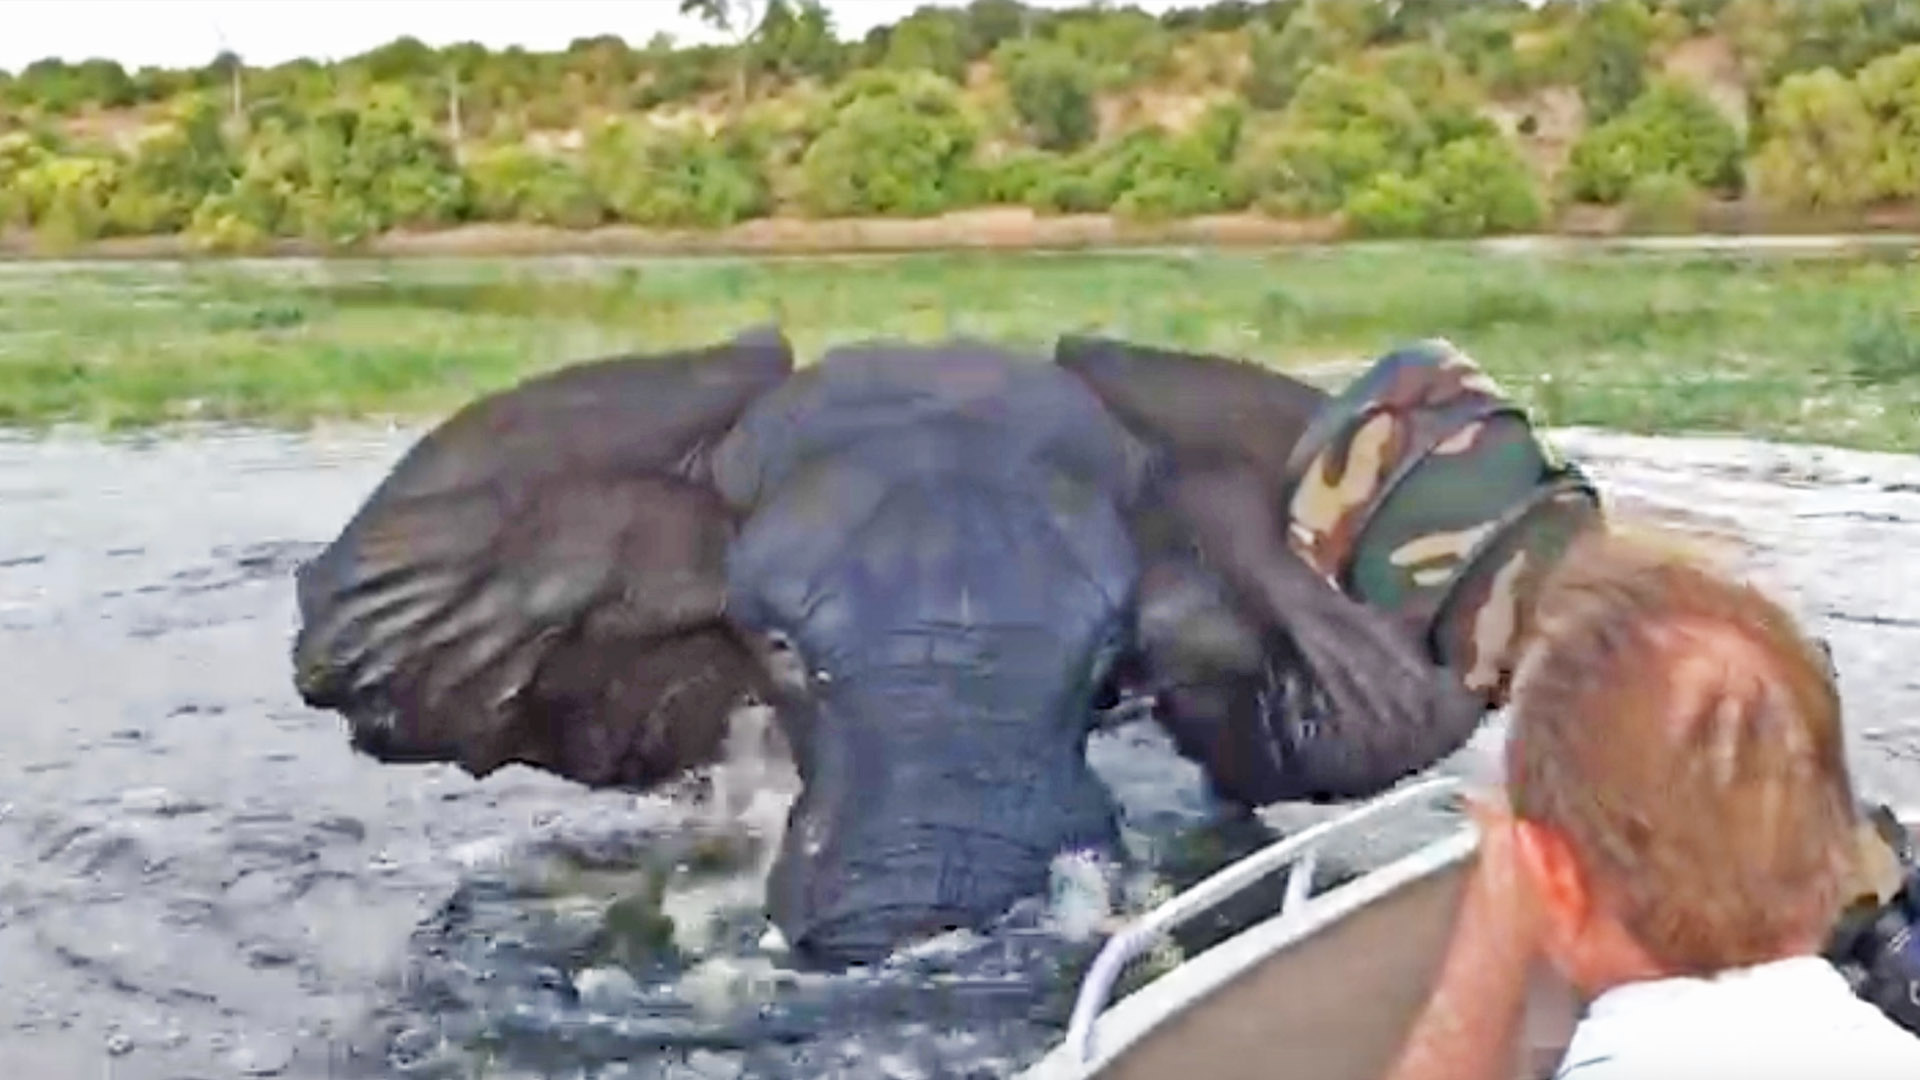 Elephant Charges & Hits Boat